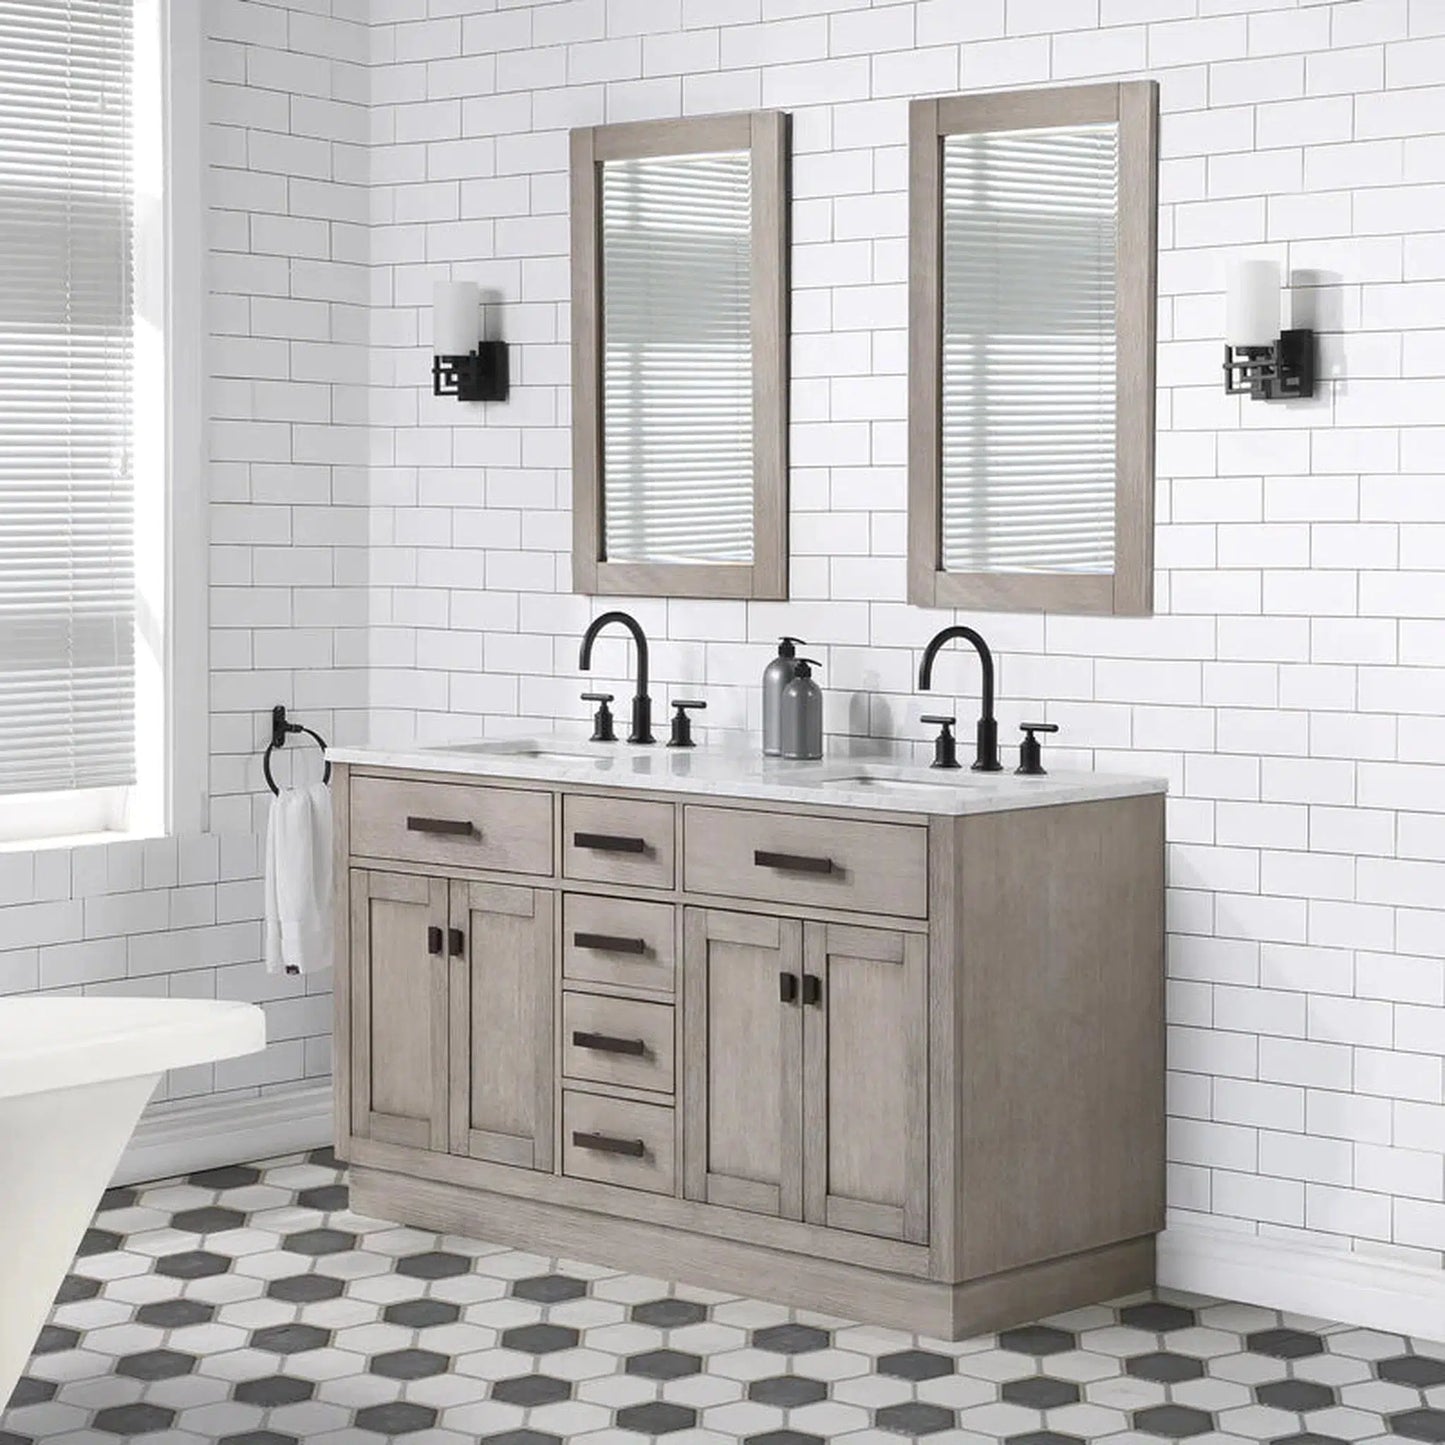 Water Creation Chestnut 60" Double Sink Carrara White Marble Countertop Vanity In Grey Oak with Grooseneck Faucets and Mirrors